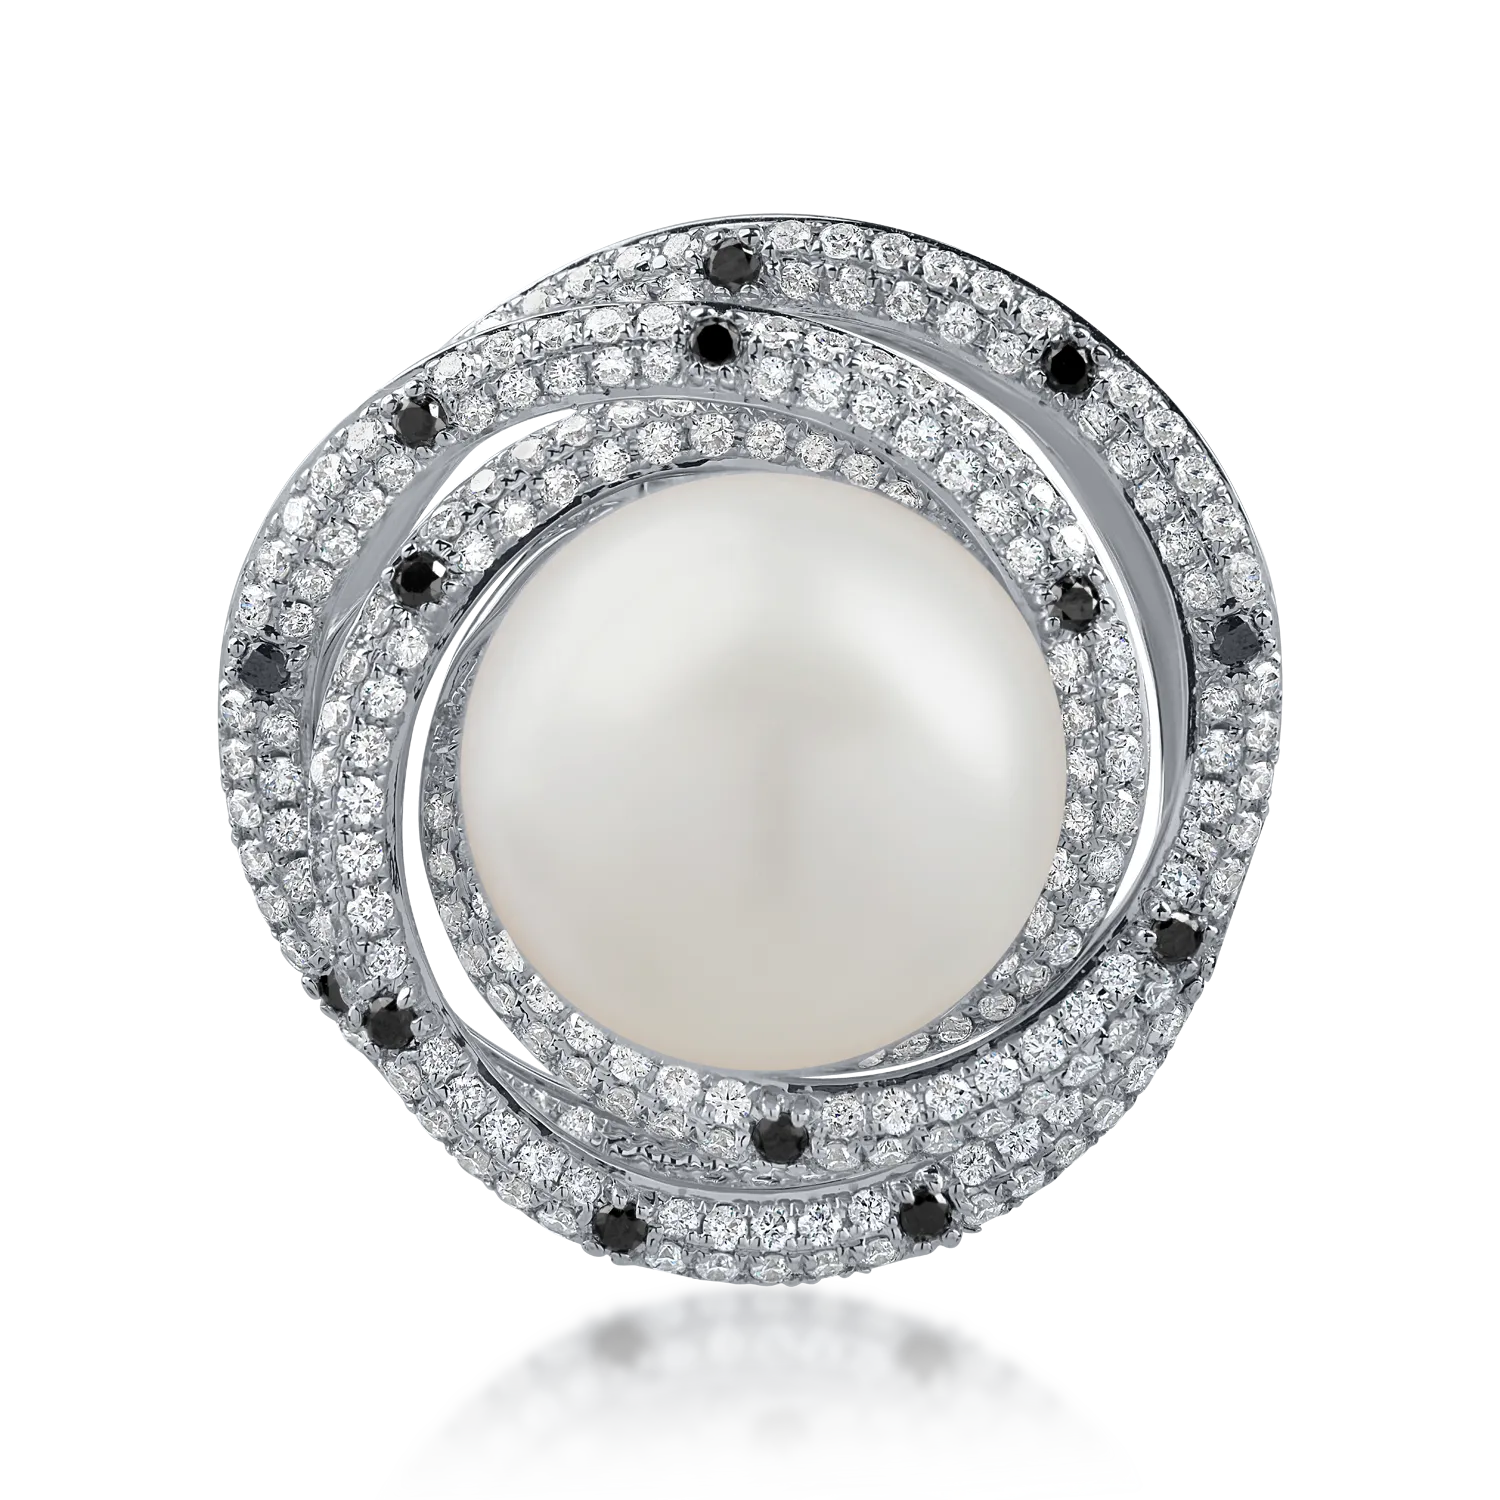 White gold brooch with 13.9ct pearl and 1.08ct diamonds